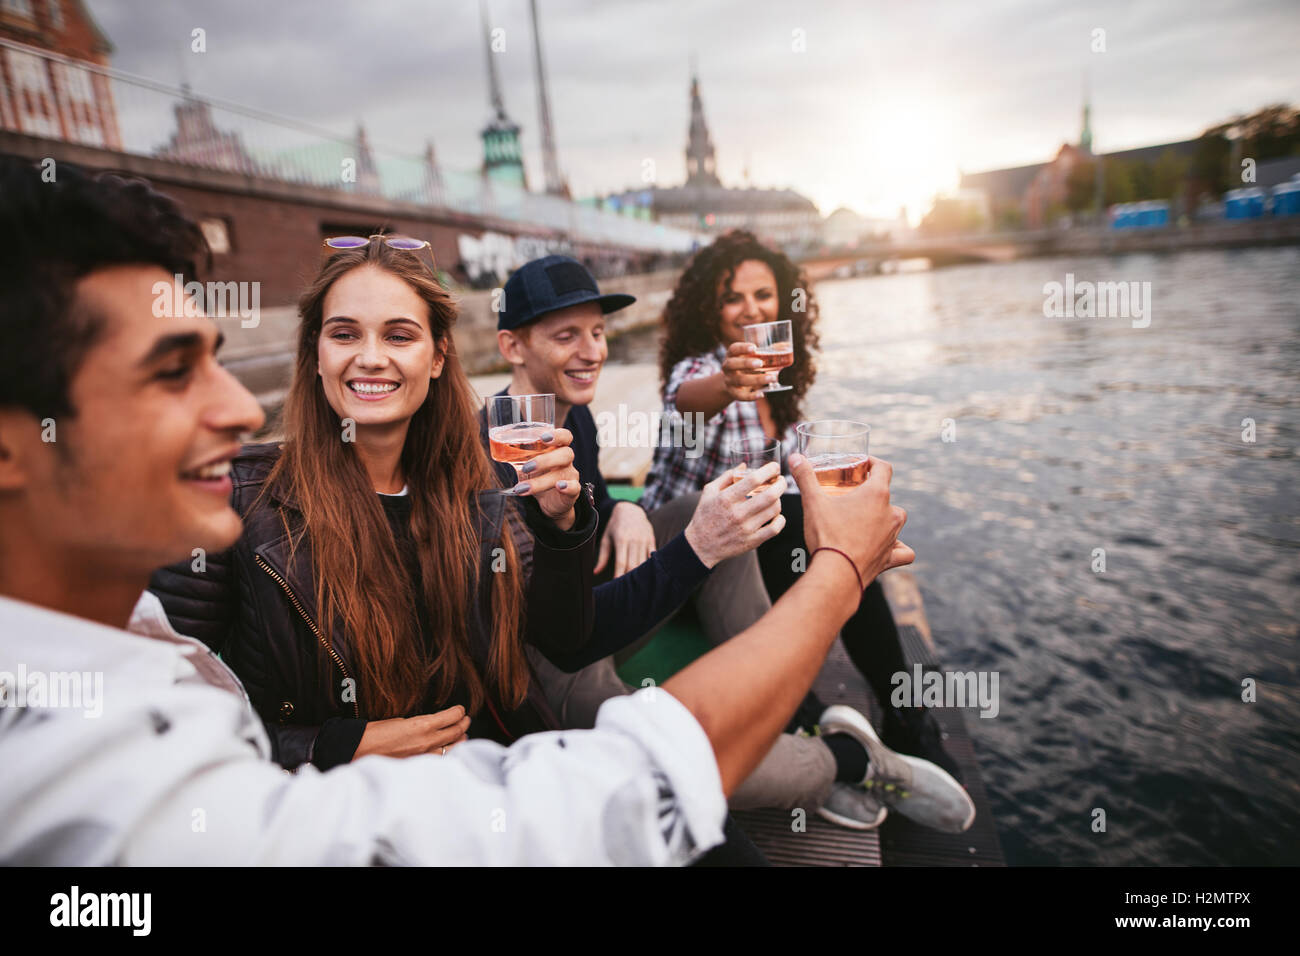 Men and women sitting on jetty and toasting drinks. Group of young friends hanging out by the lake in city. Stock Photo